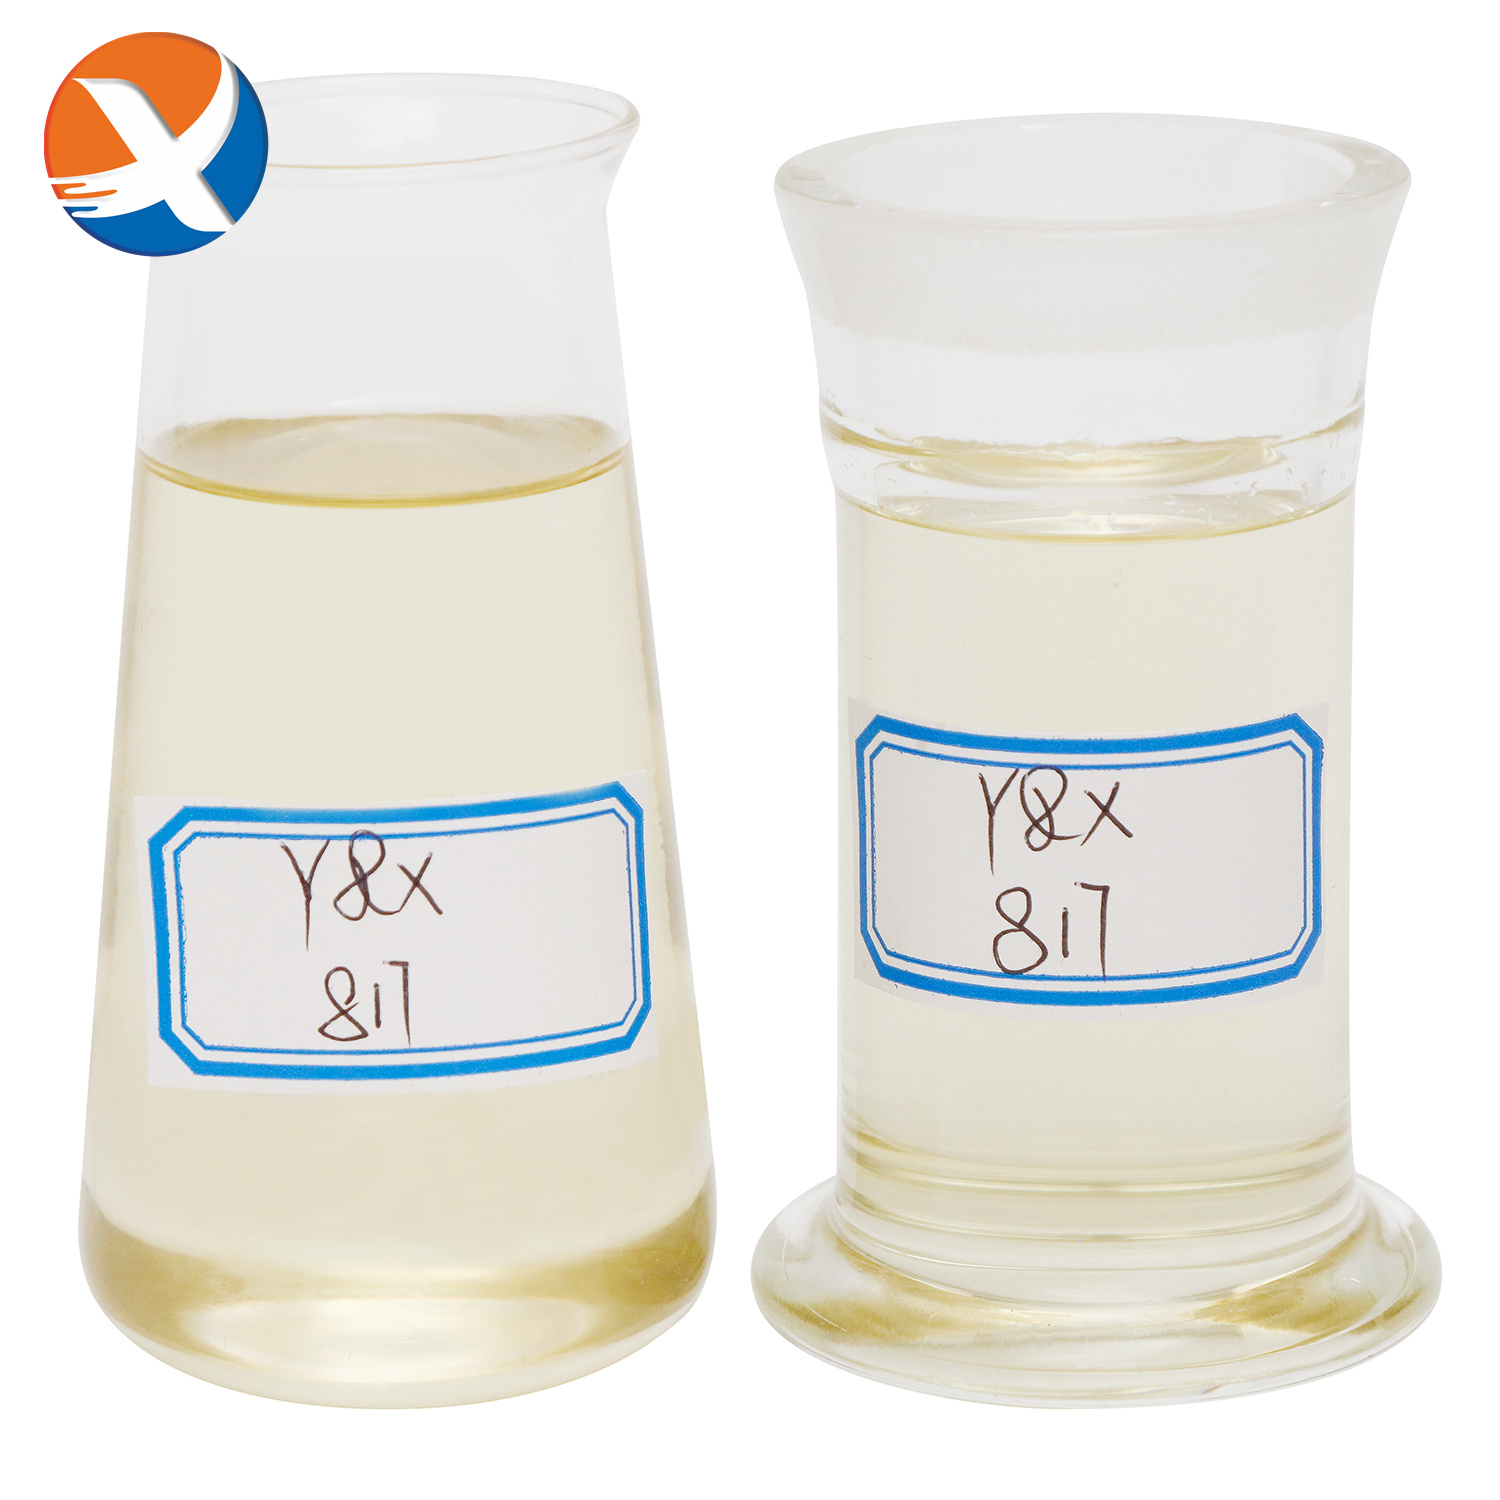 Revolutionary Biodegradable Flotation Reagent YX817 for Iron Ore Beneficiation and Silica Extraction